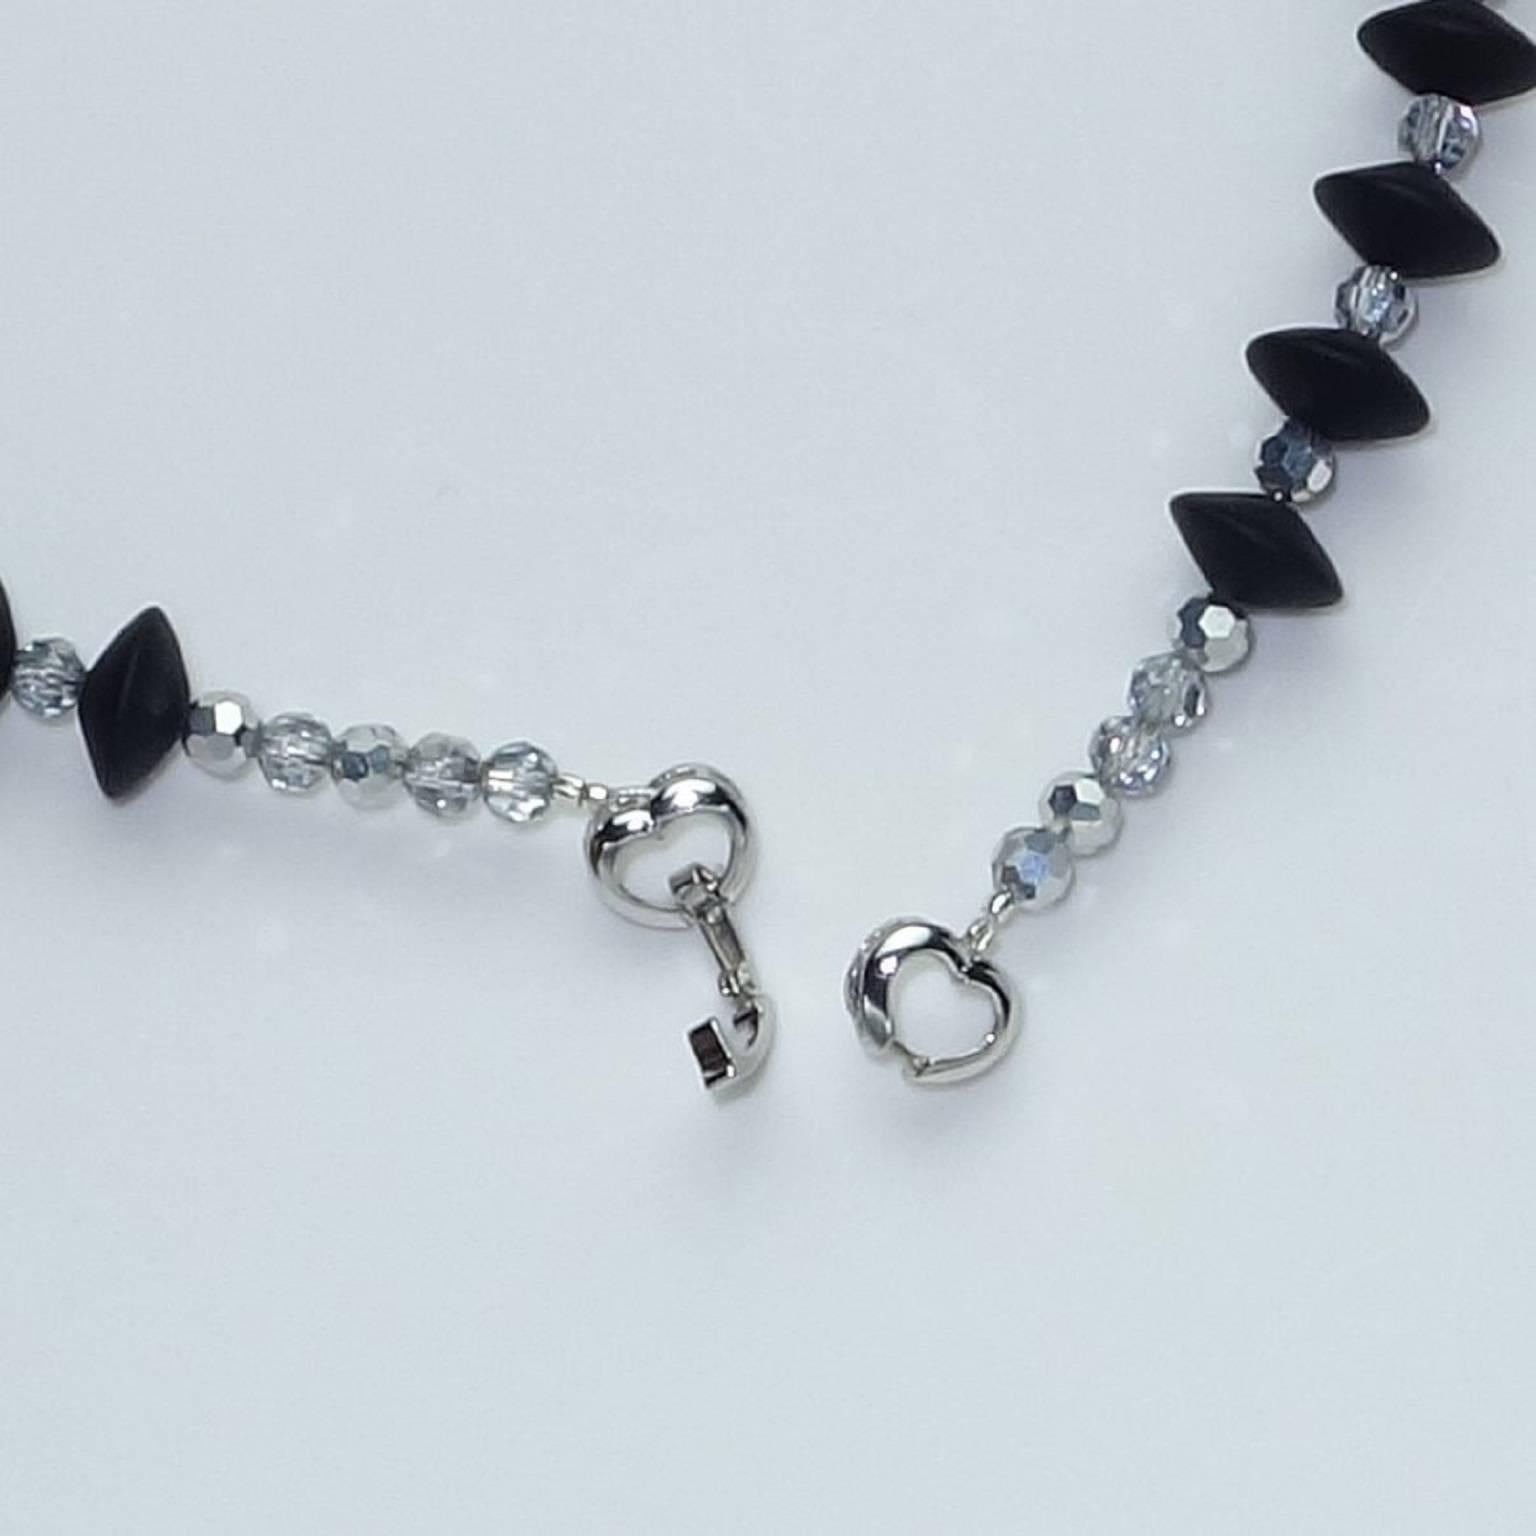 Contemporary AJD Black Onyx and Silver Crystal Necklace